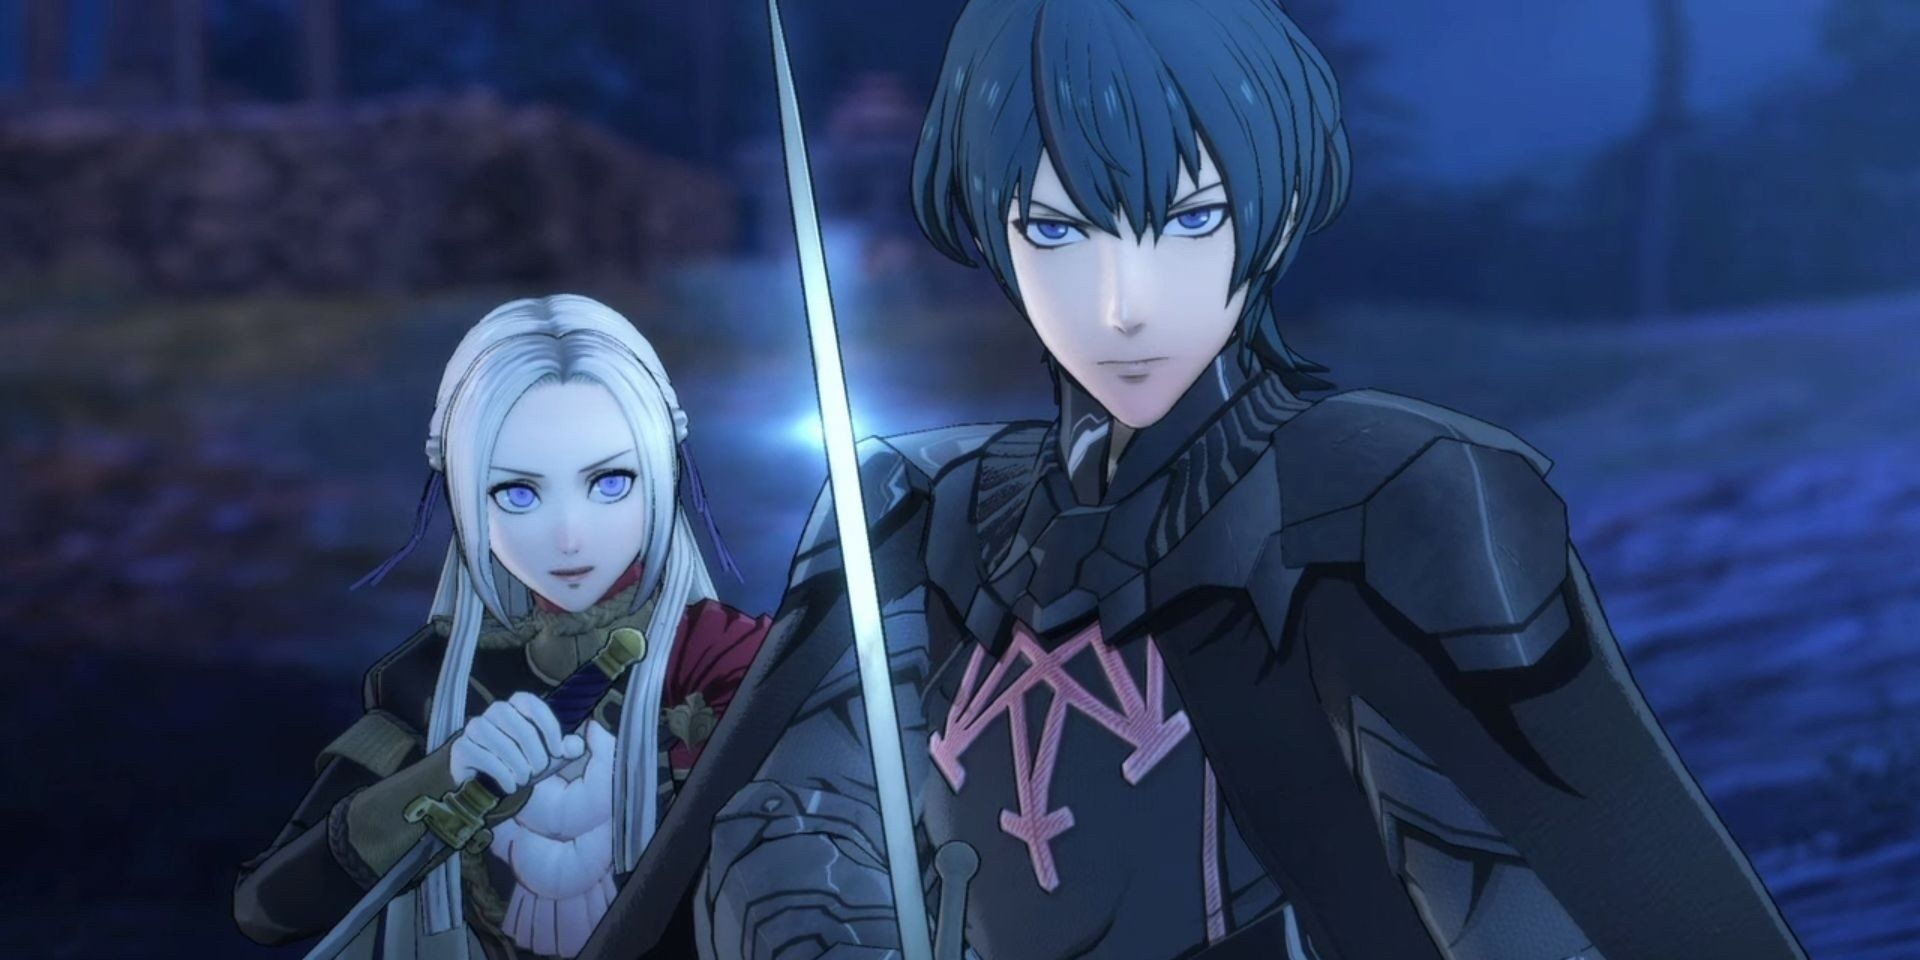 A cutscene between Byleth and another character in Fire Emblem: Three Houses